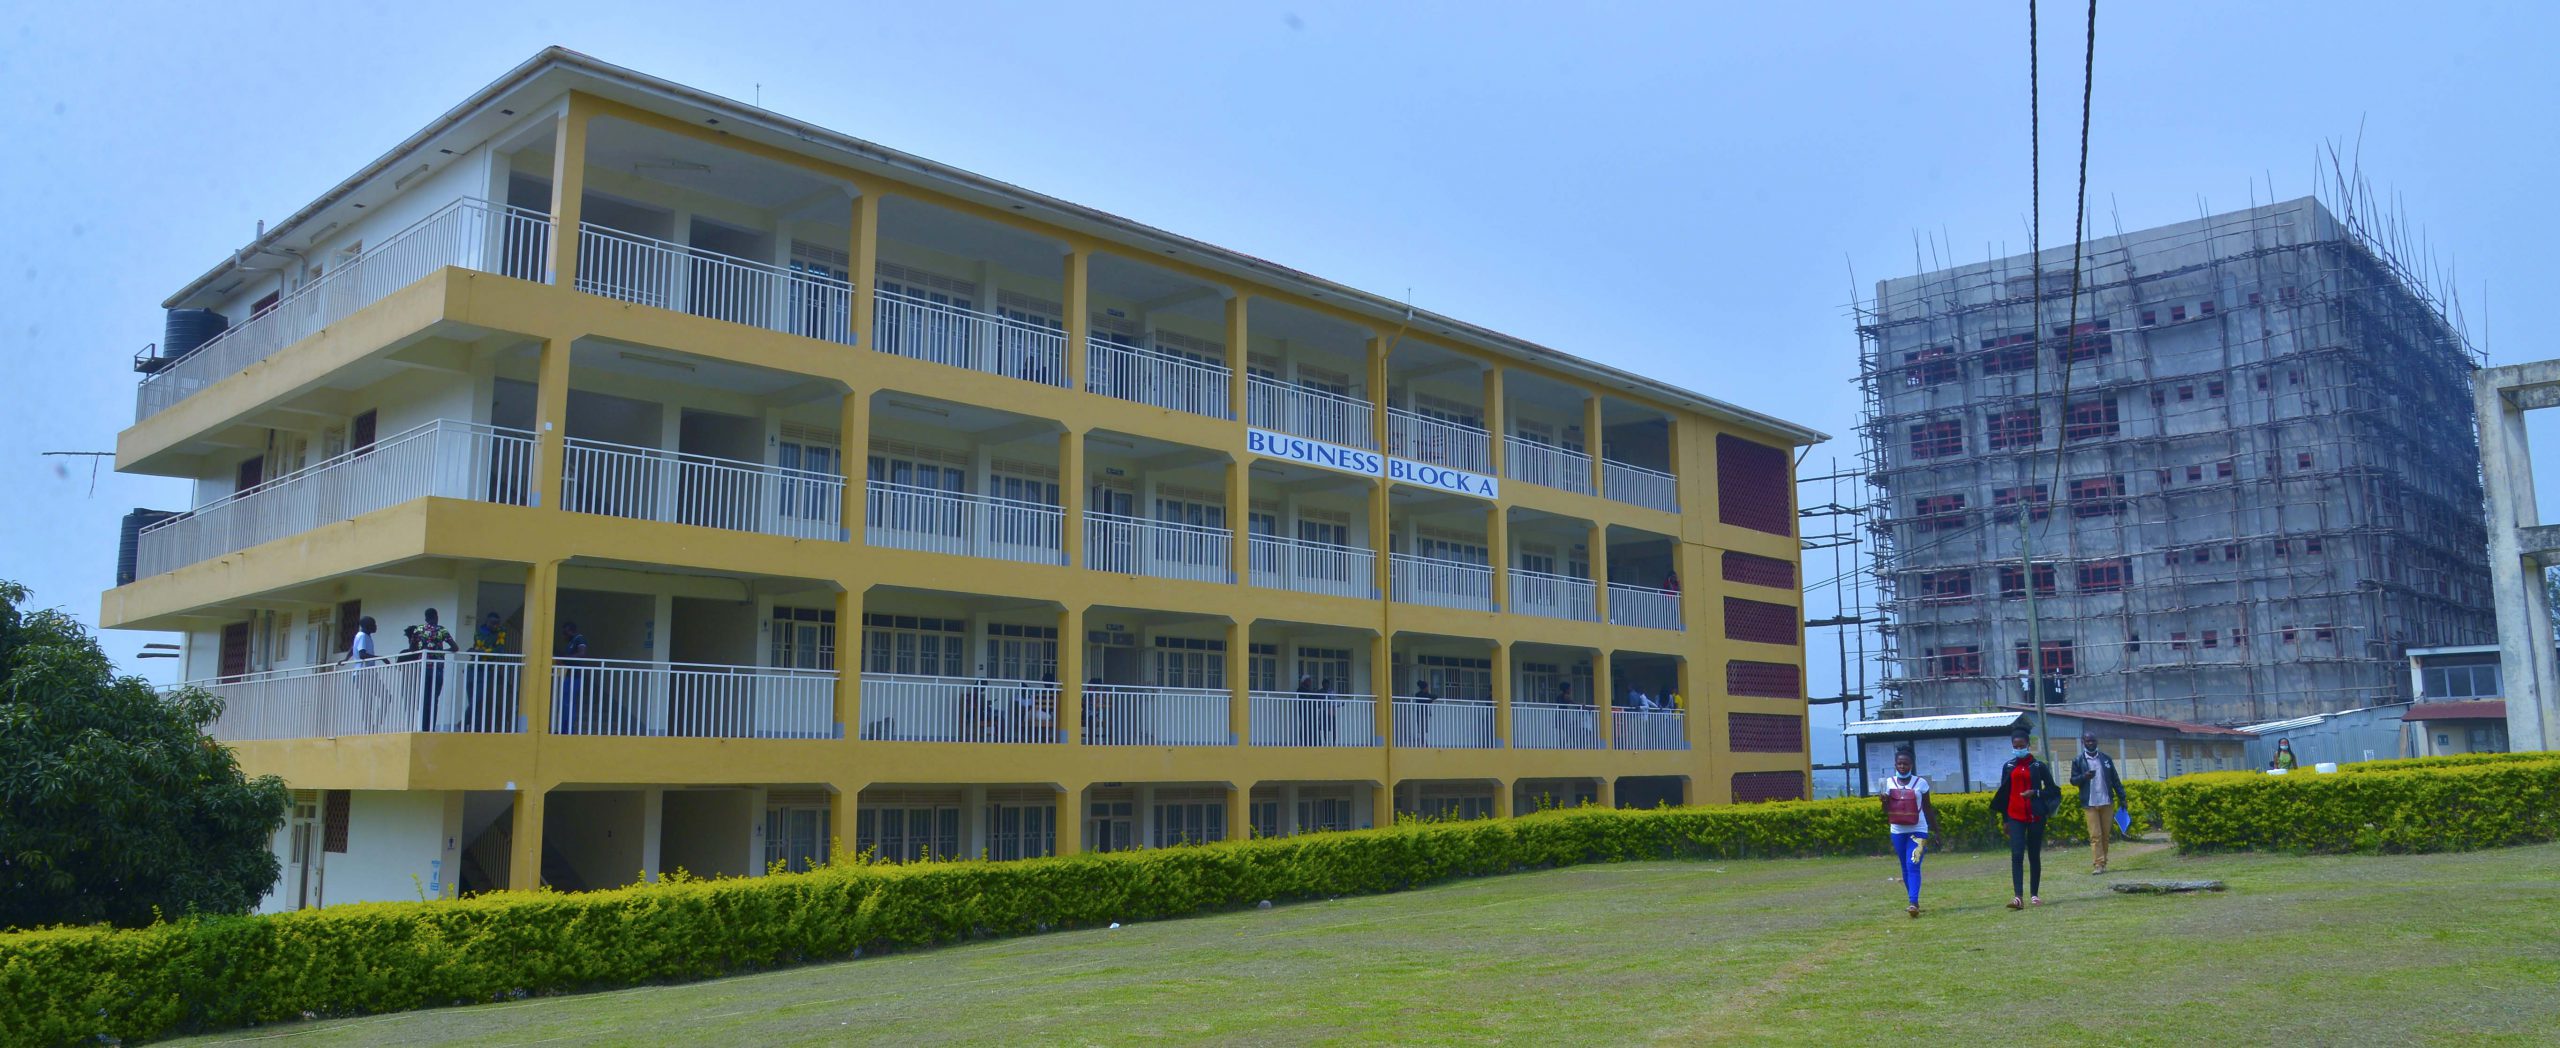 Faculty of Business Economics and Governance